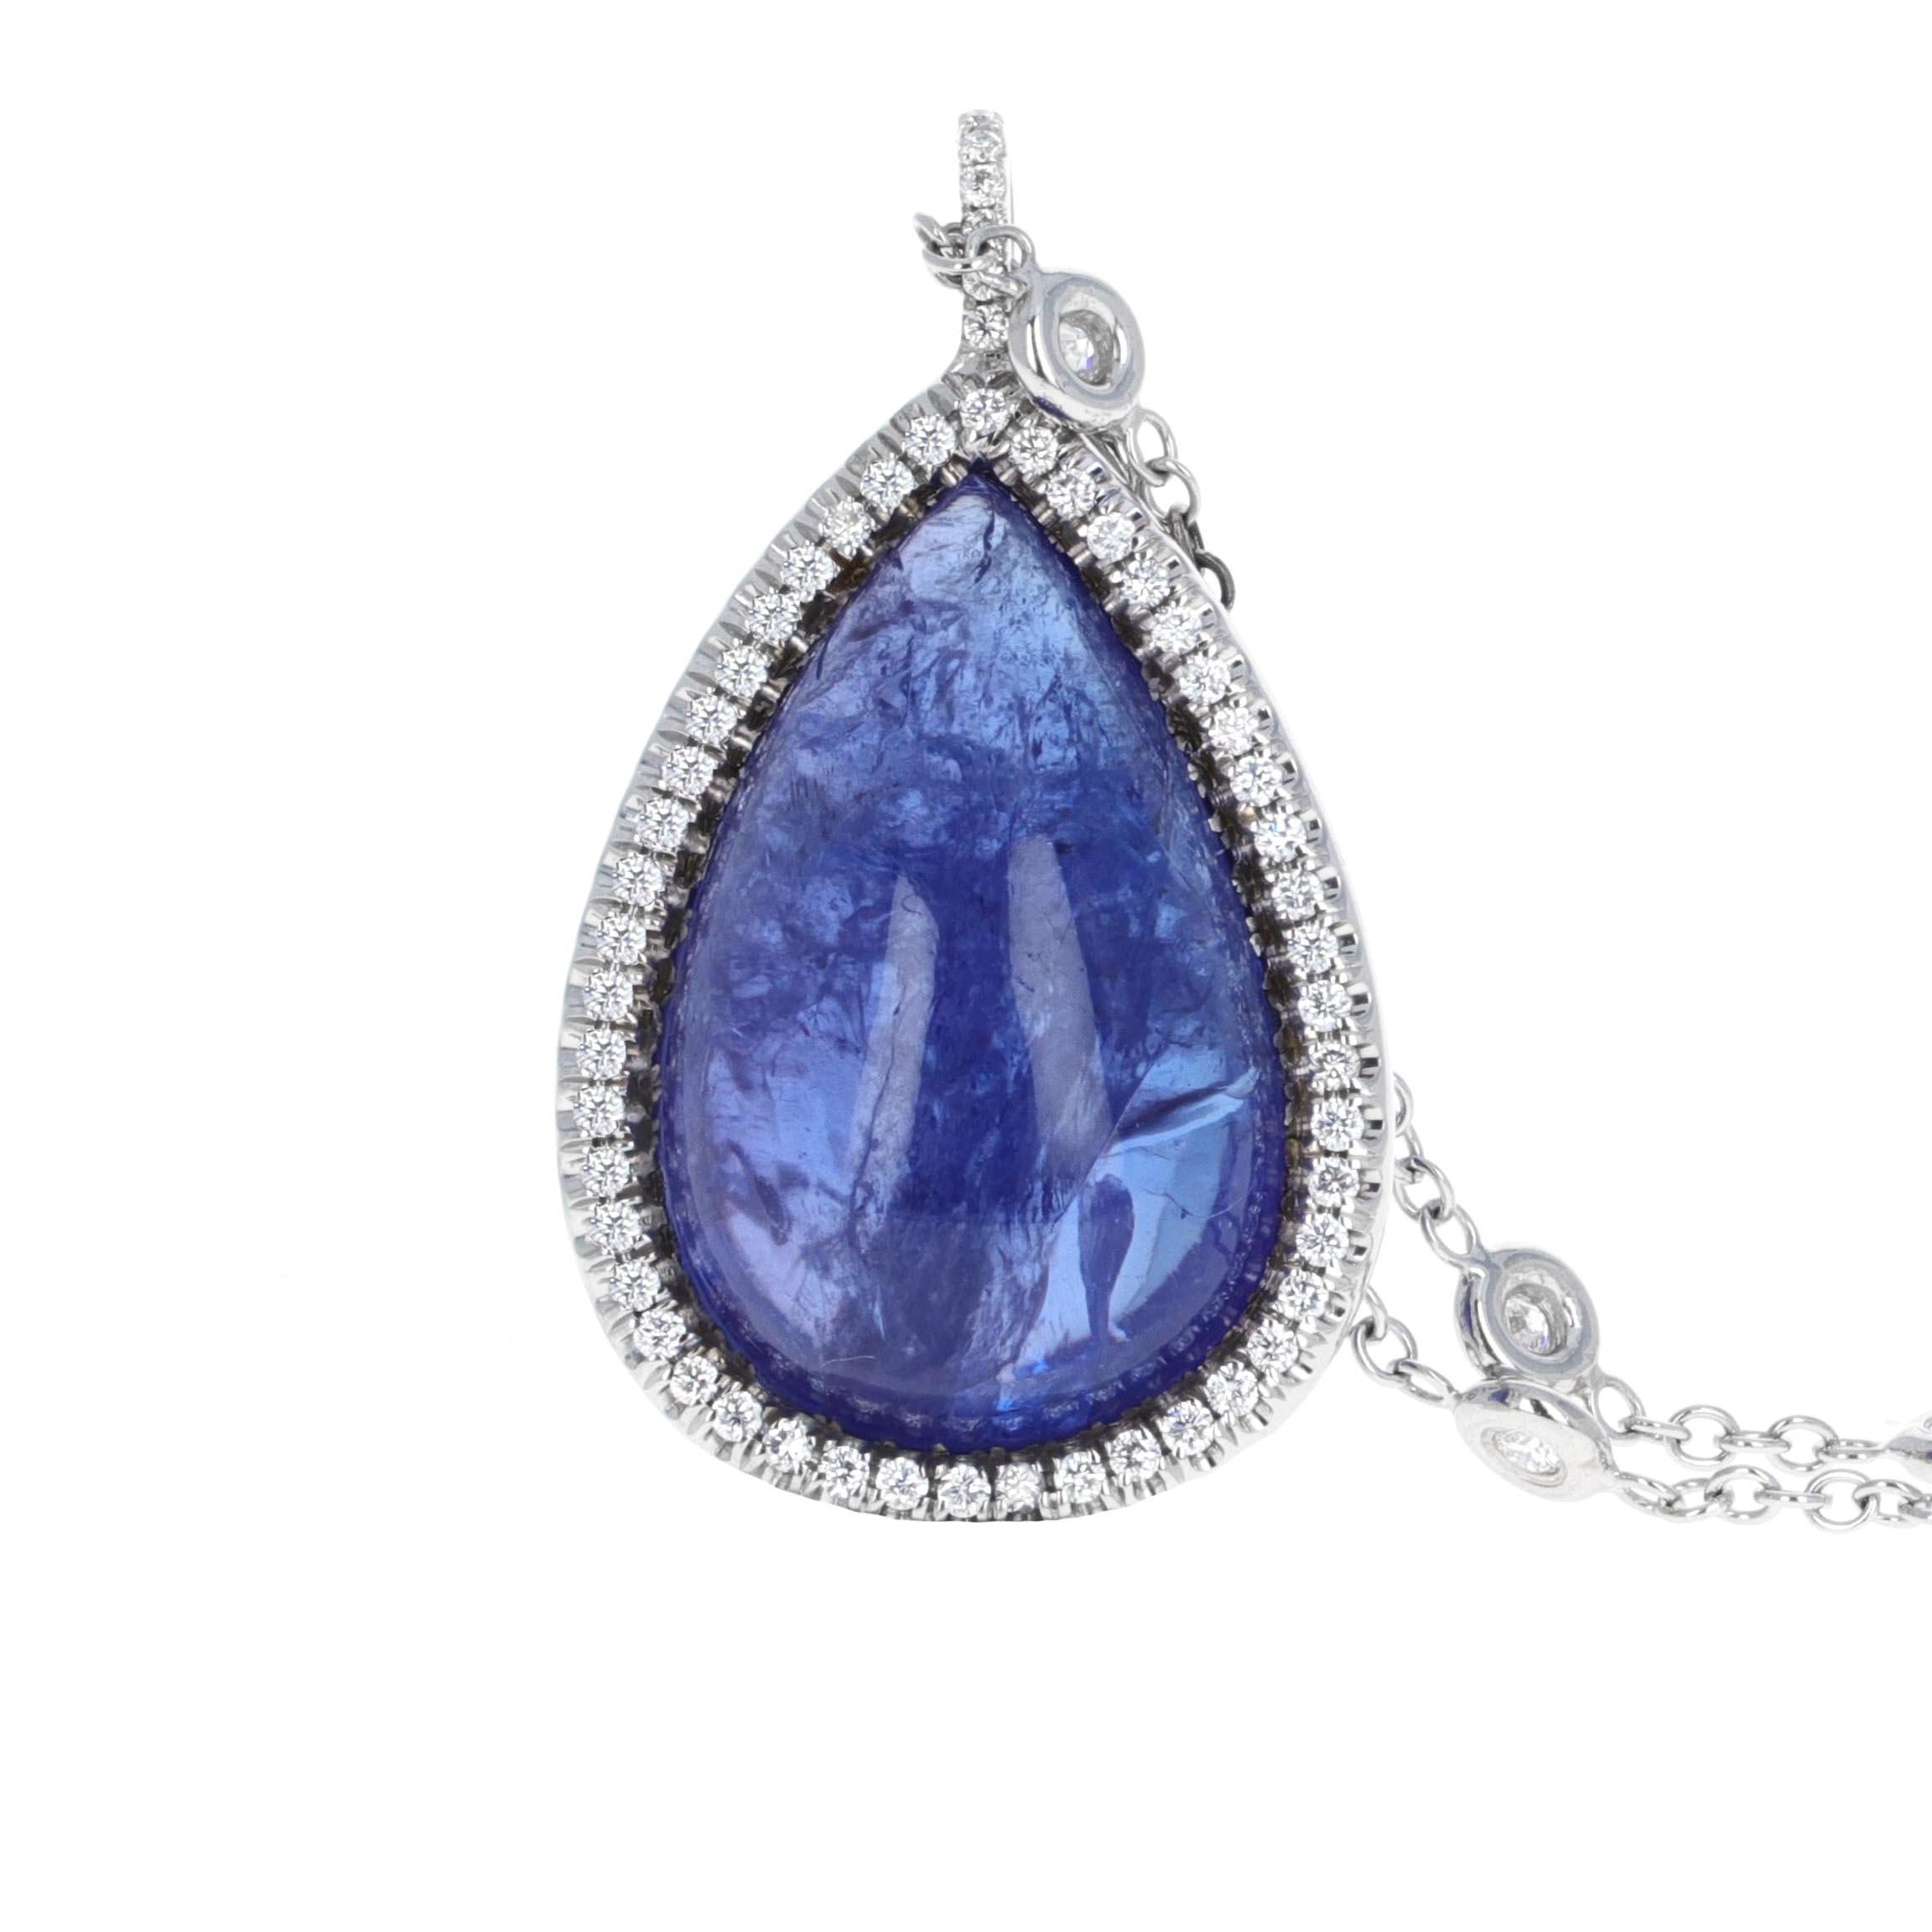  Stylish 22.32 carat pear shape Tanzanite pendant with diamond by the yard chain necklace. The Tanzanite is a cabochon. A cabachon is a gemstone which has been shaped and polished, opposed to being faceted. The pendant has diamond pave around it.